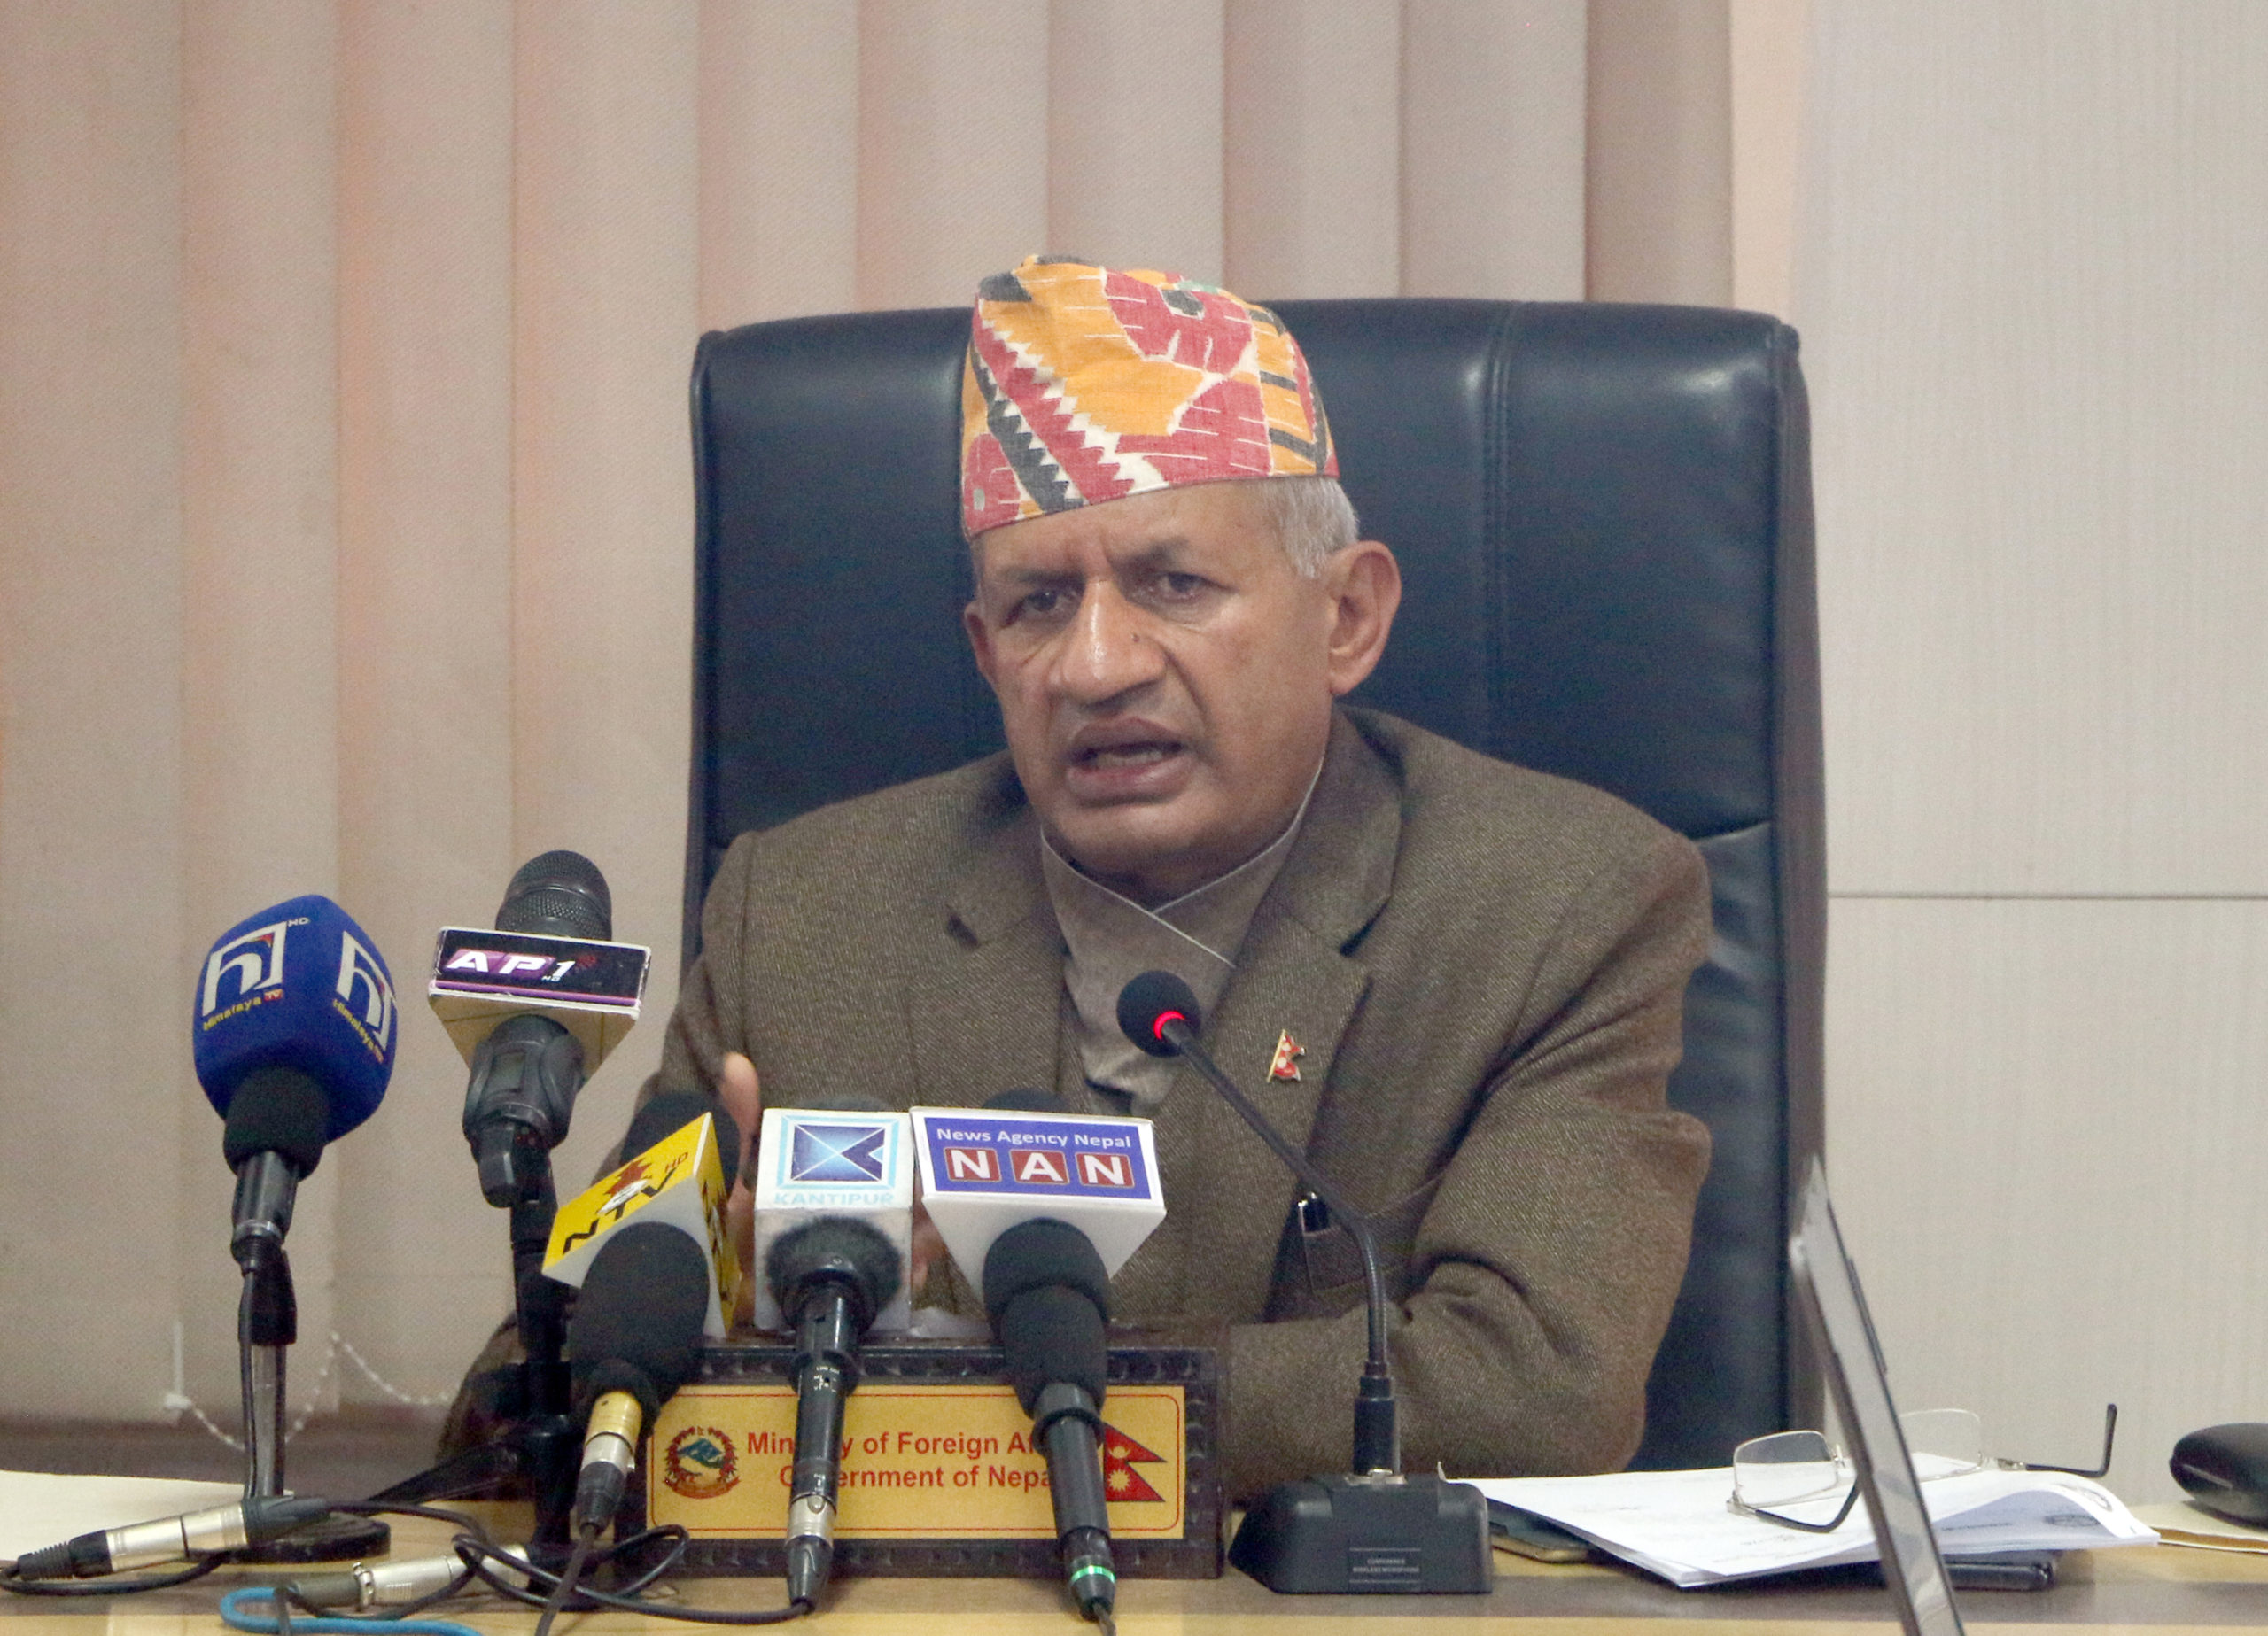 Minister Gyawali lauds role by NRNA during COVID crisis